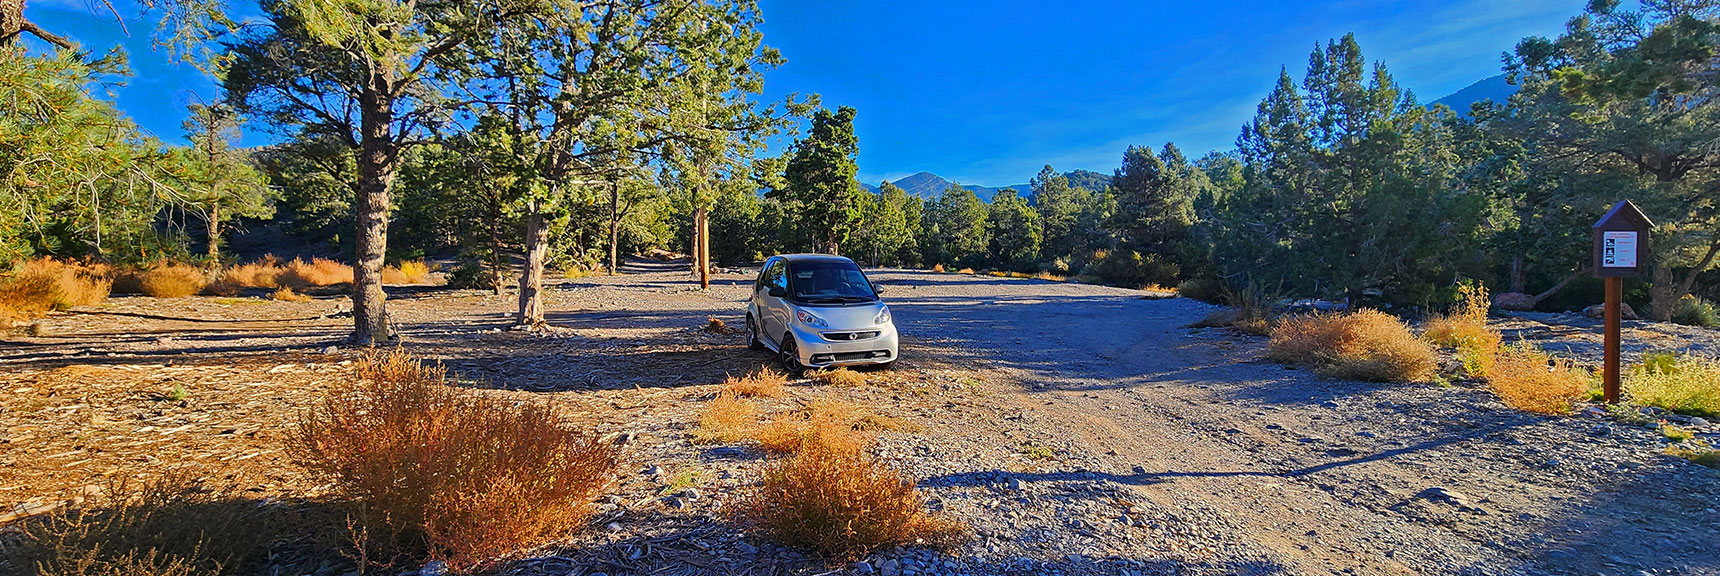 Large Parking/Camping Area at Start Point Just Below CC Springs & Lovell Canyon Rds. | Switchback Spring Pinnacle | Wilson Ridge | Lovell Canyon, Nevada